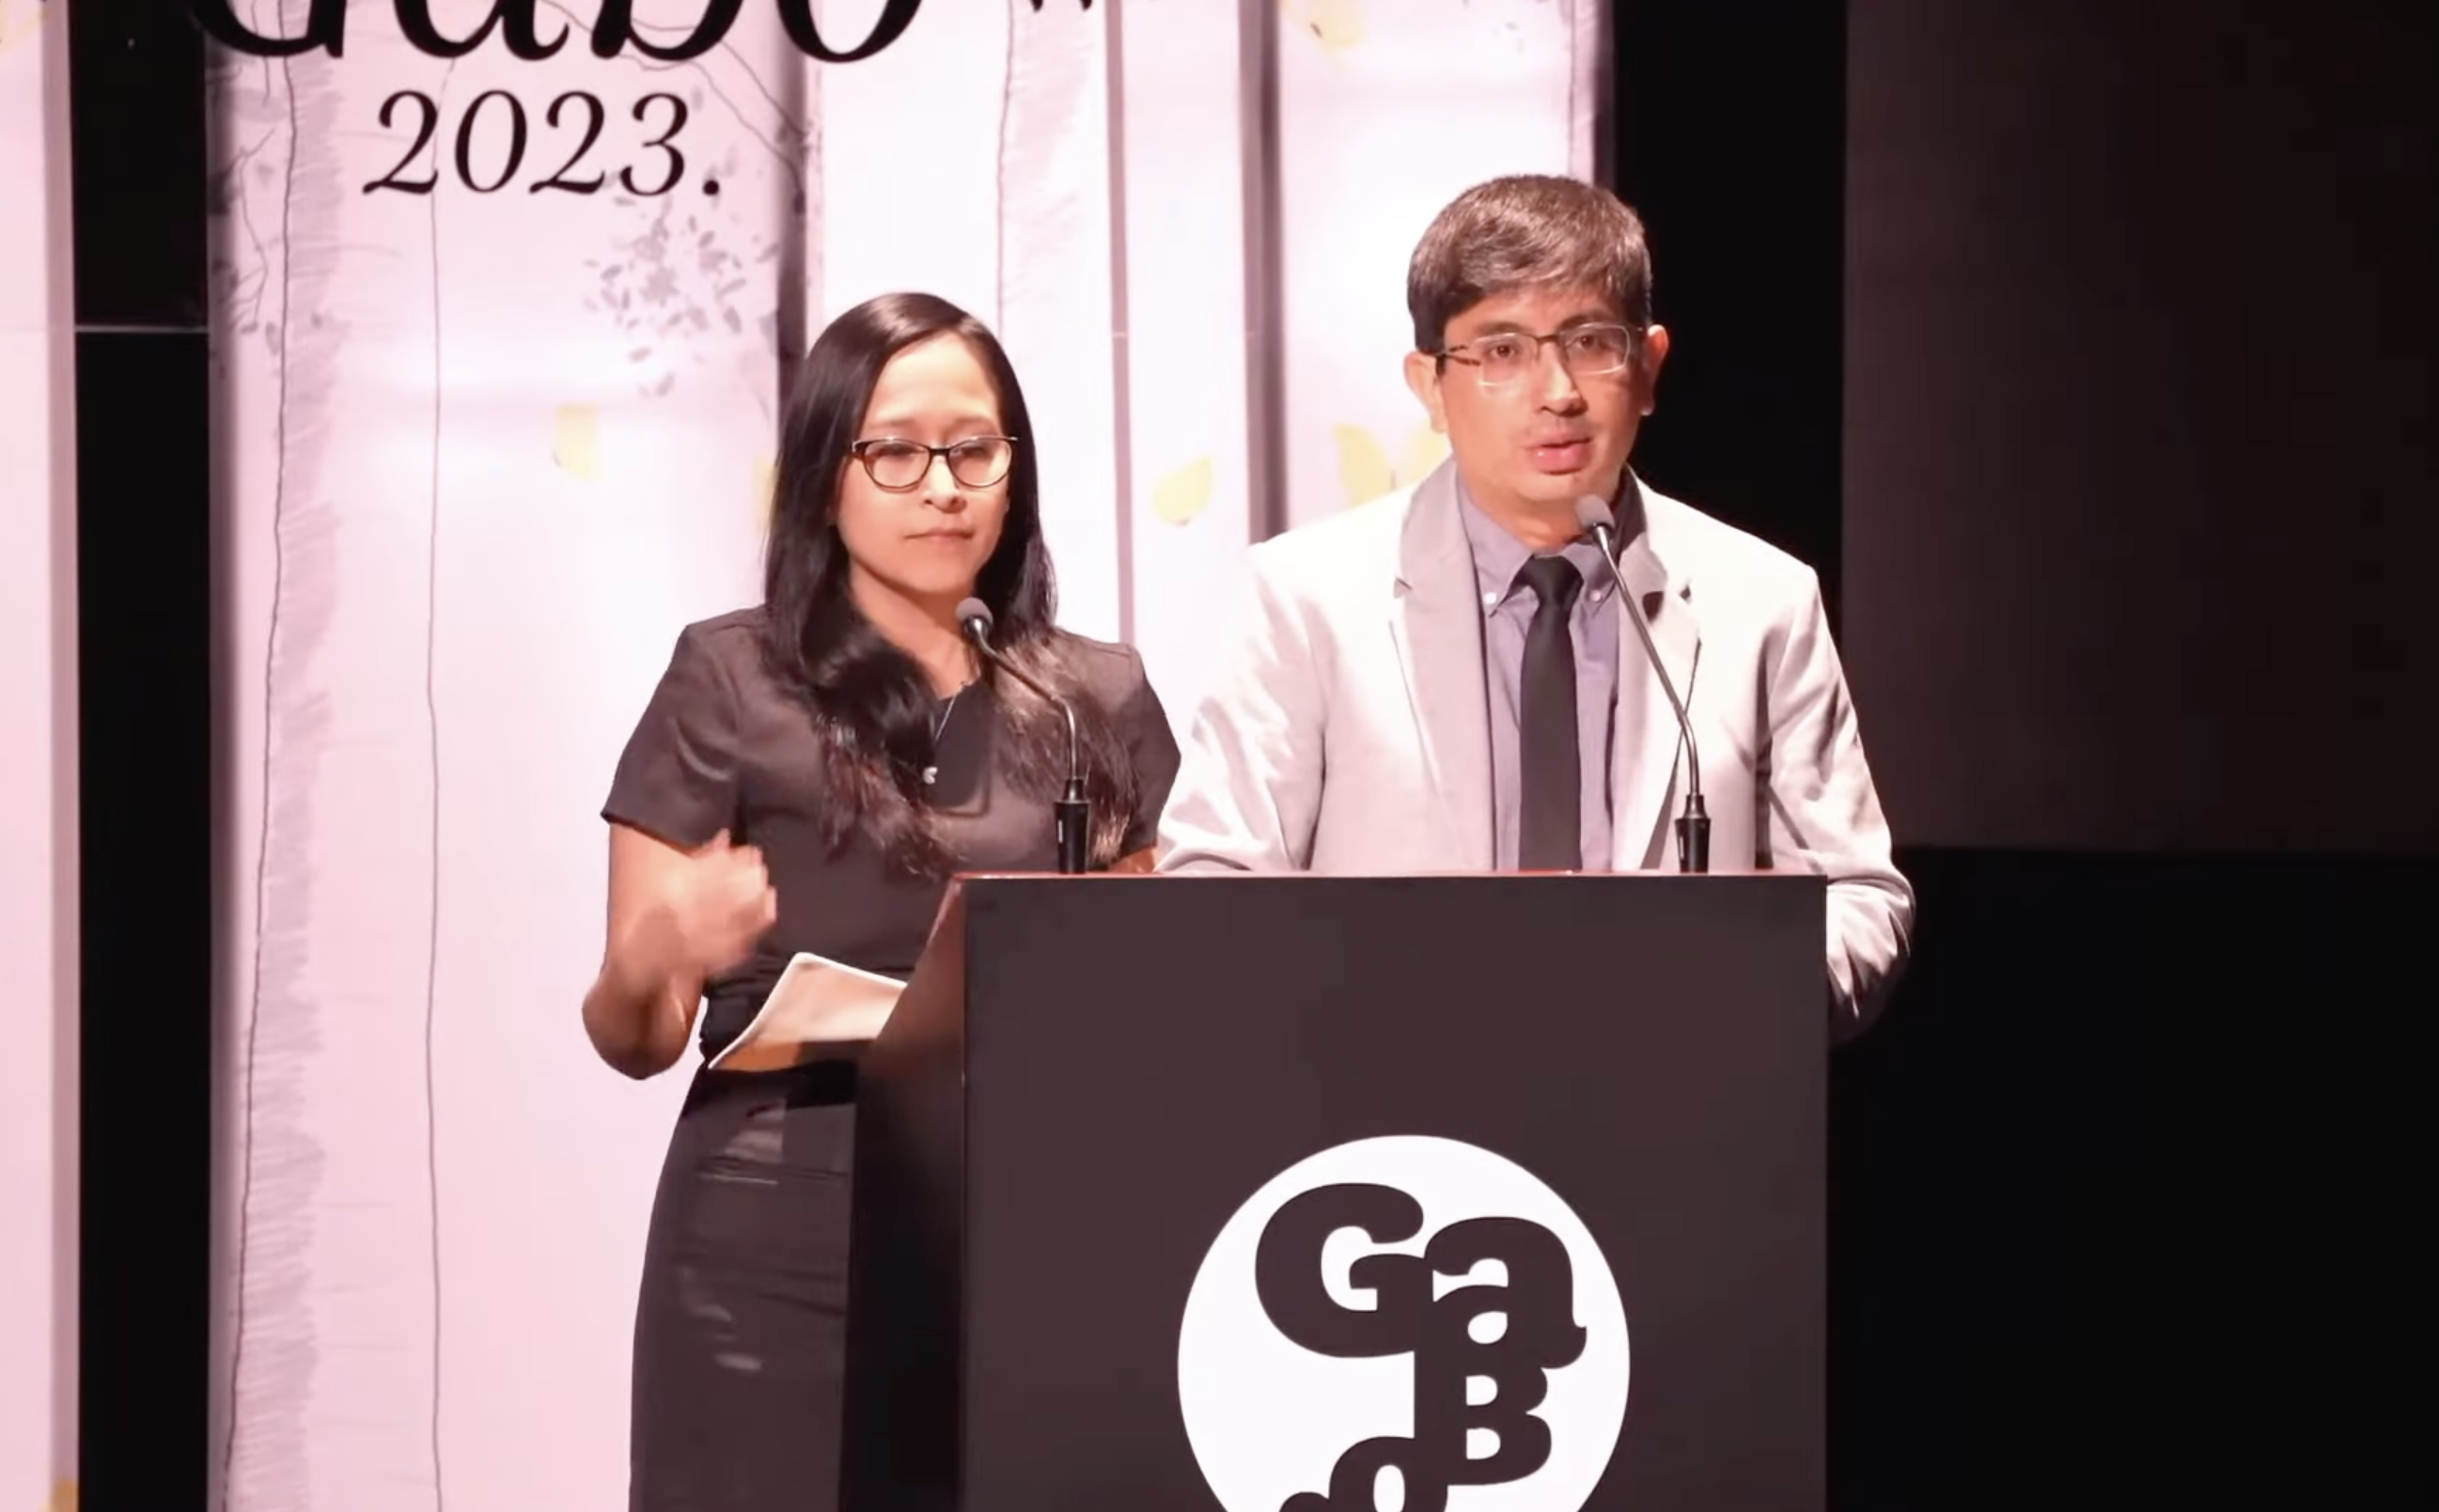 Peruvian journalists Rosa Laura and César Pardo, from IDL-Reporteros, receive an award at the Gabo Awards ceremony.